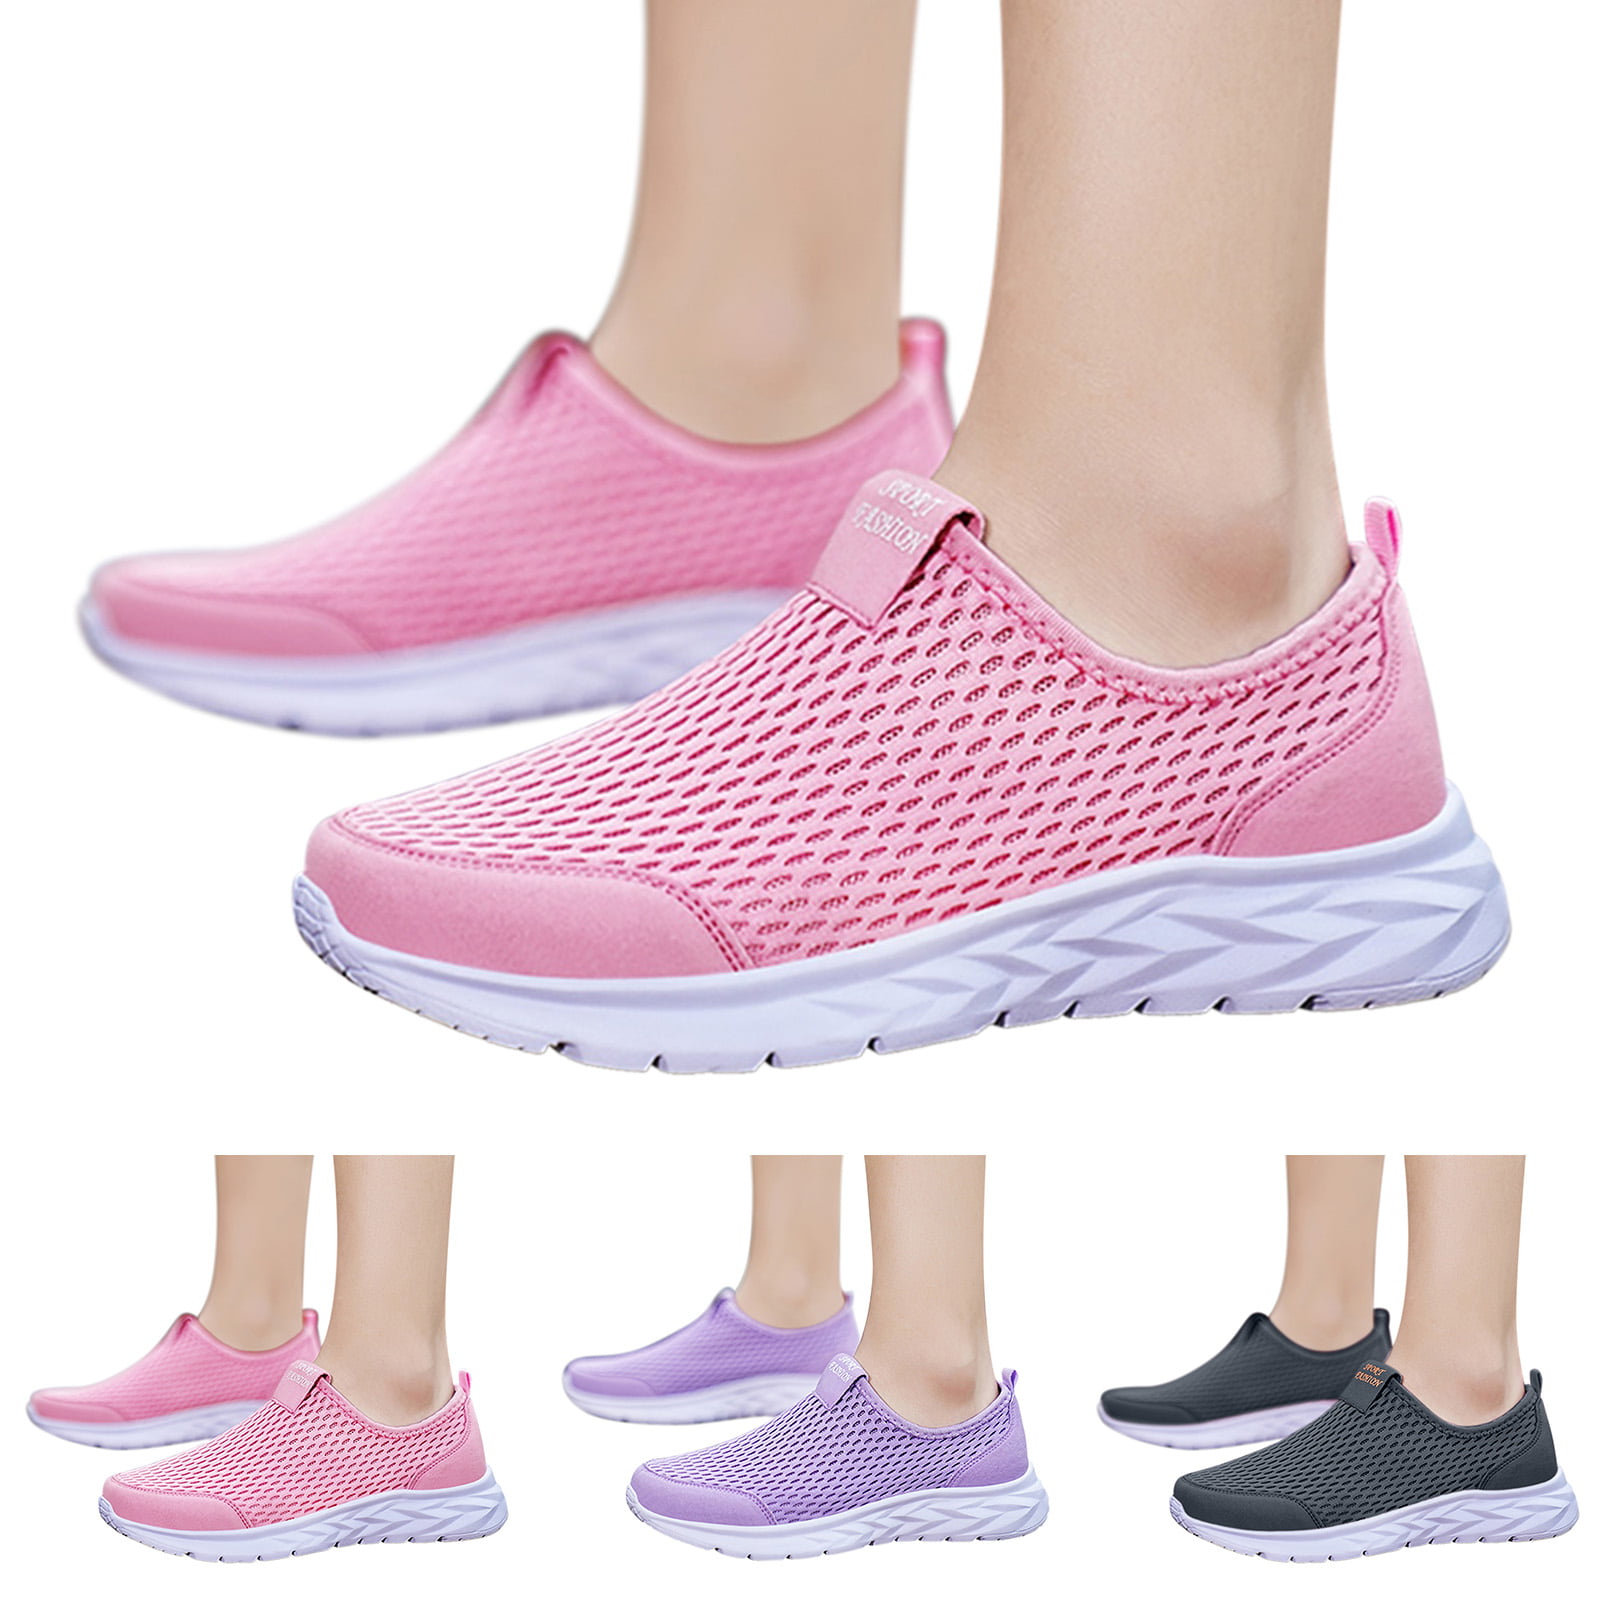 TOWED22 Womens Sneakers Womens Walking Shoes Slip on Sock Sneakers Lady  Mesh Cushion Platform Loafers Fashion Casual(Orange,6.5) 